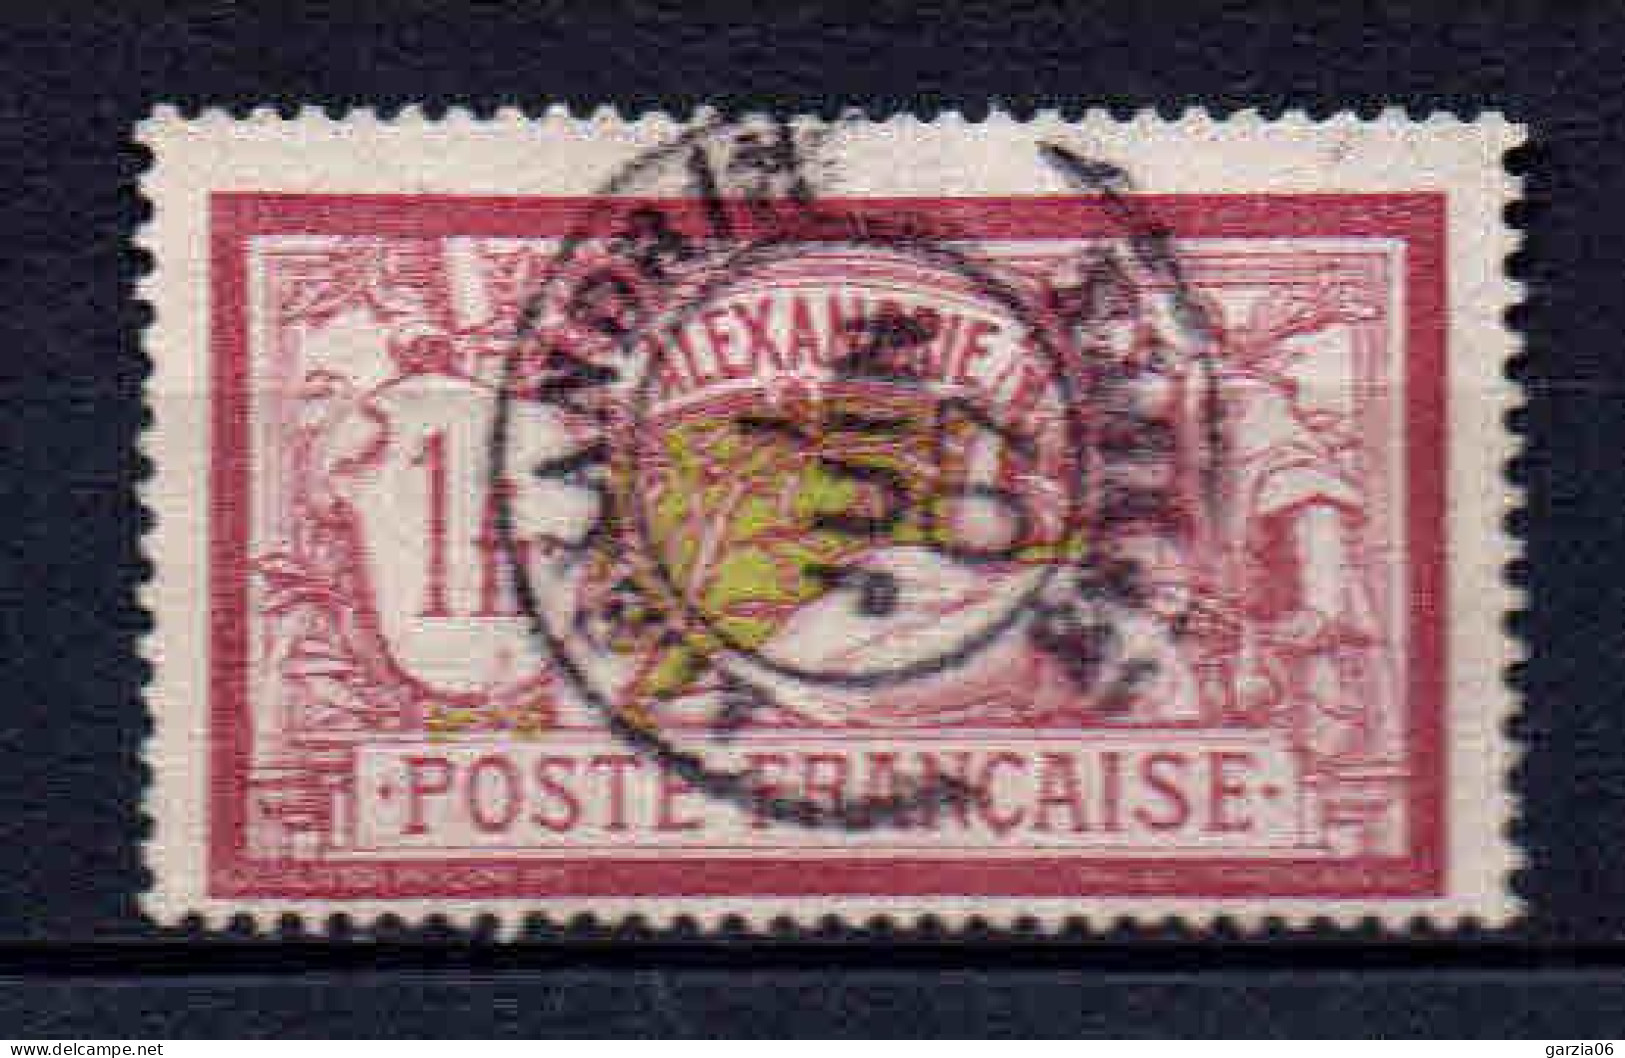 Alexandrie - 1902 -  Type Merson  -  N° 31 - Oblit - Used - Used Stamps